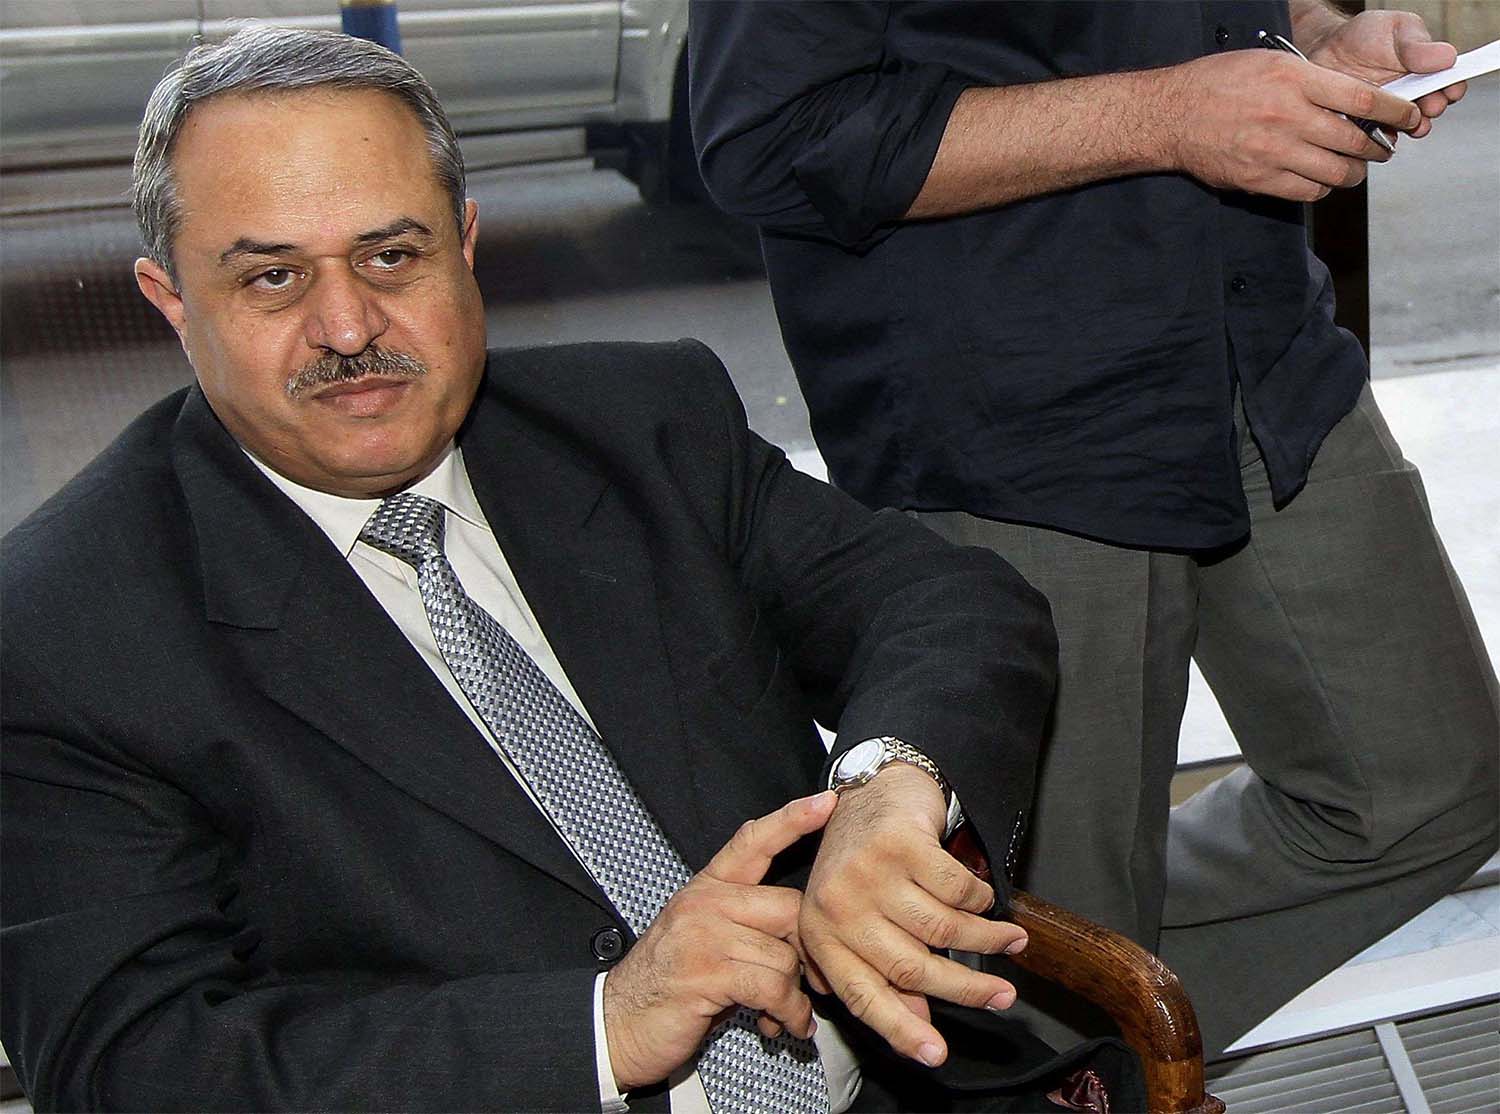 Marei member of the Damascus-tolerated opposition will face Bashar al-Assad in this month's presidential election